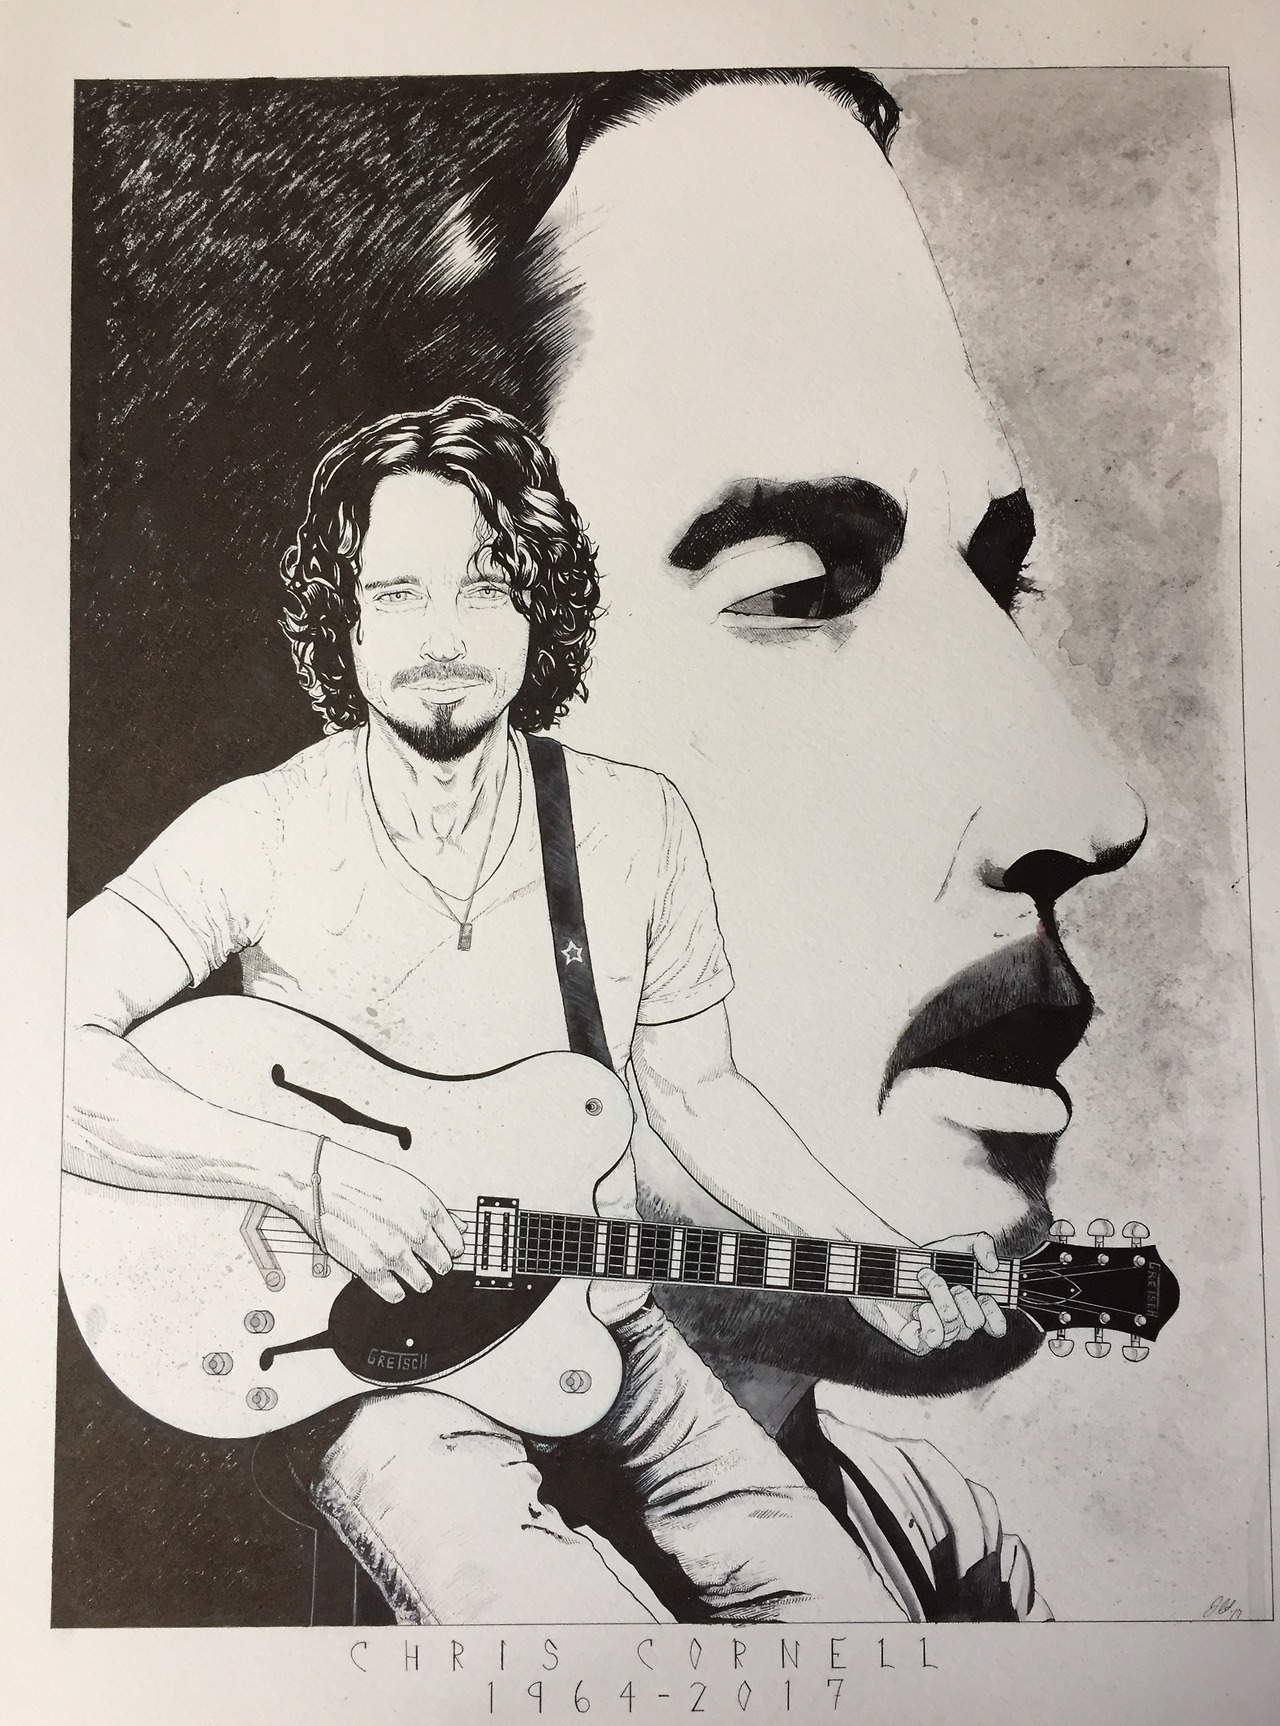 Chris Cornell Tribute Illustration (Pen and ink) — Immediately post your art to a topic and get feedback. Join our new community, EatSleepDraw Studio, today!